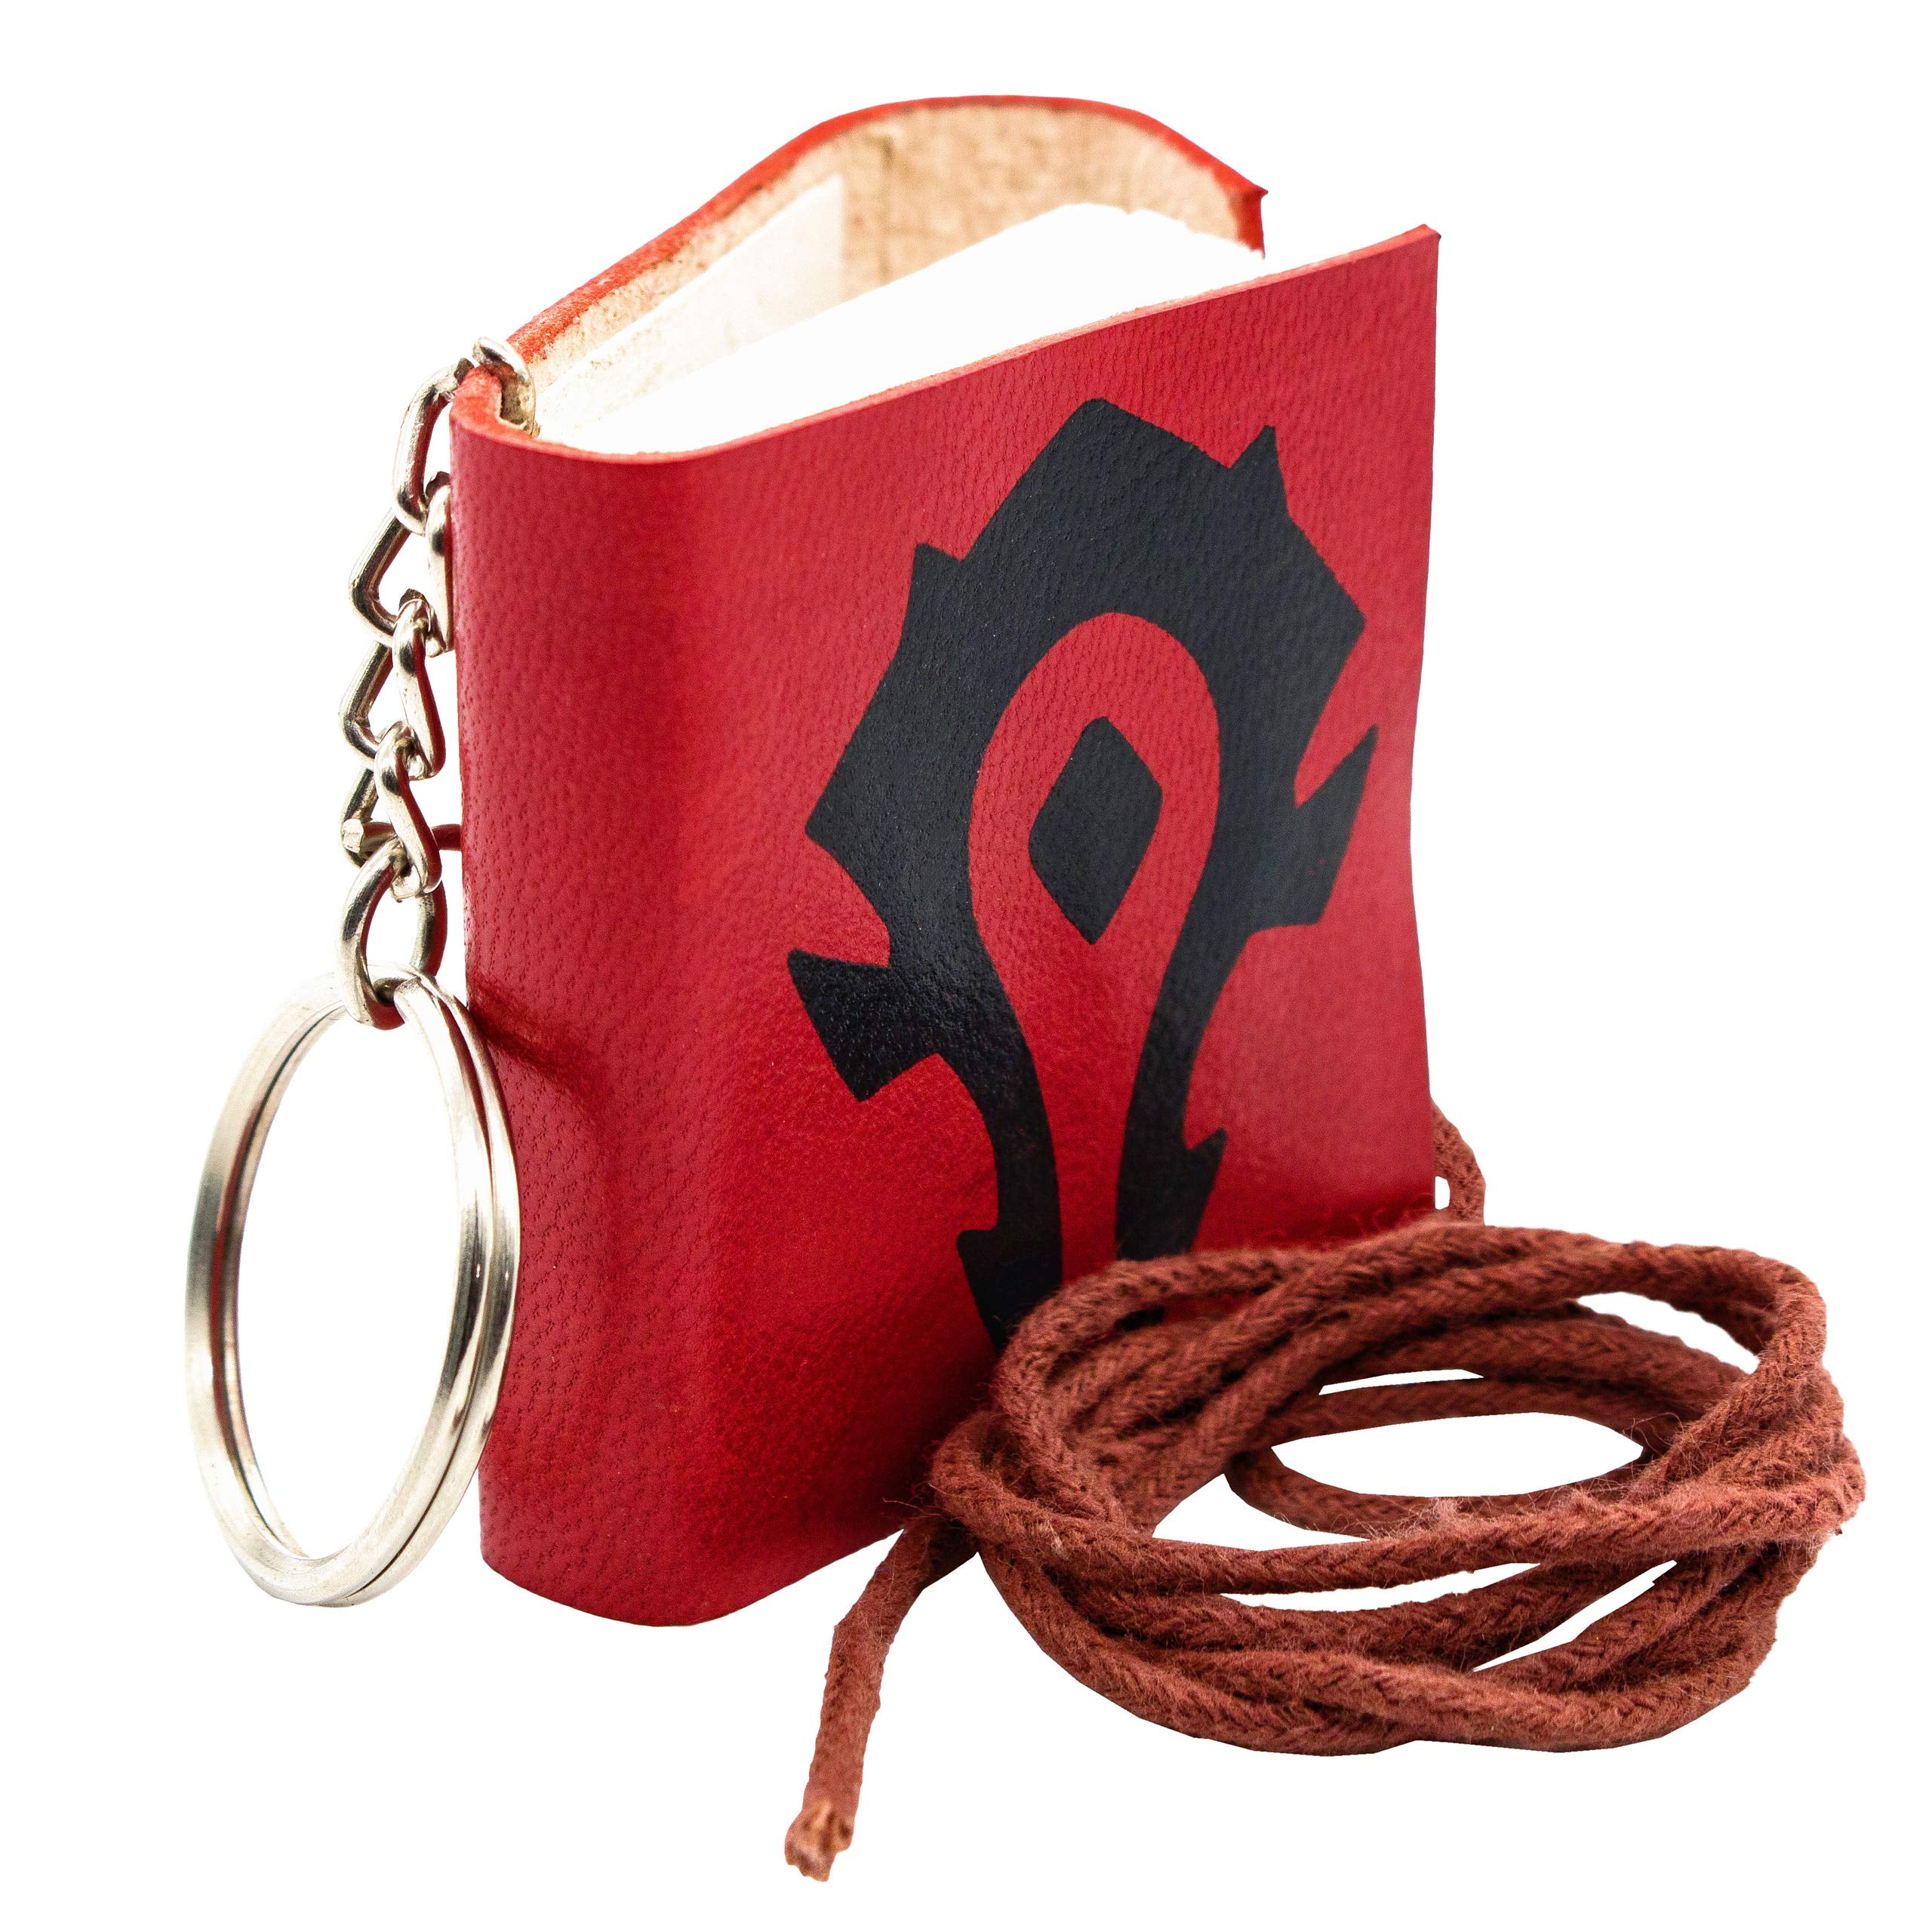 Mythrojan - Red Sorcerer Key Ring Medieval Leather Journal - Antiqued Diary Notebook